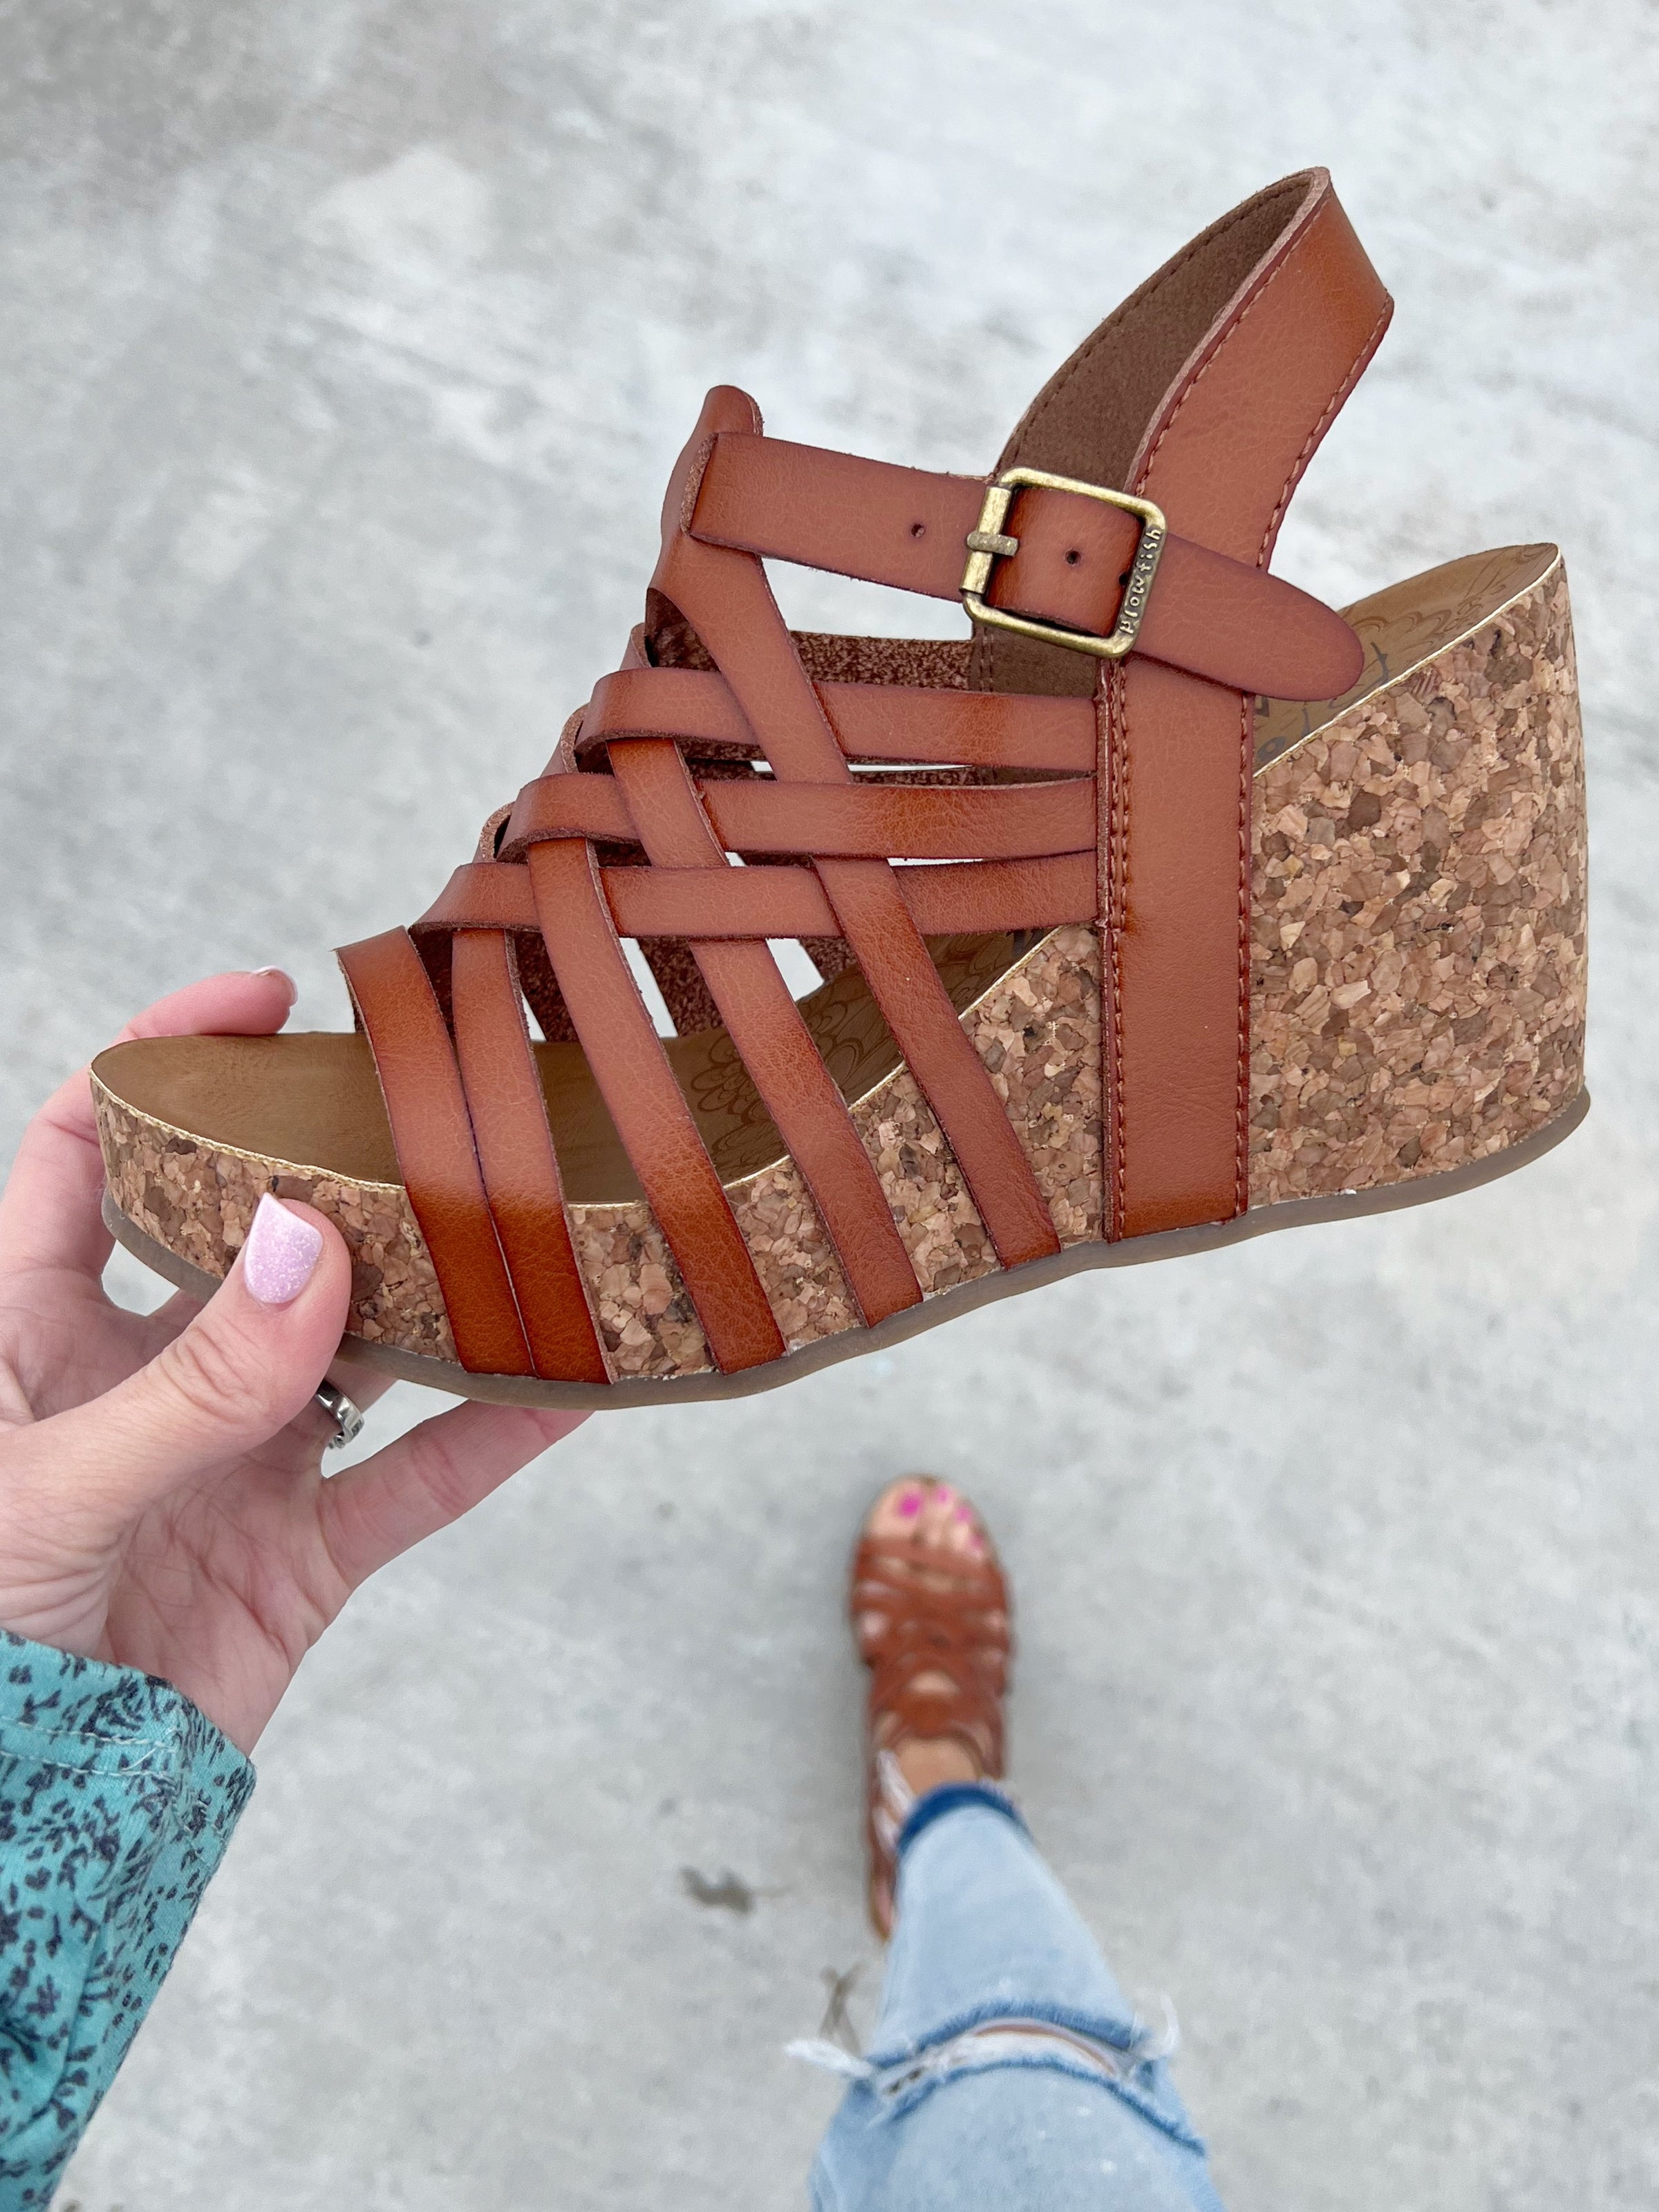 Aggregate more than 139 blowfish wedge sandals best